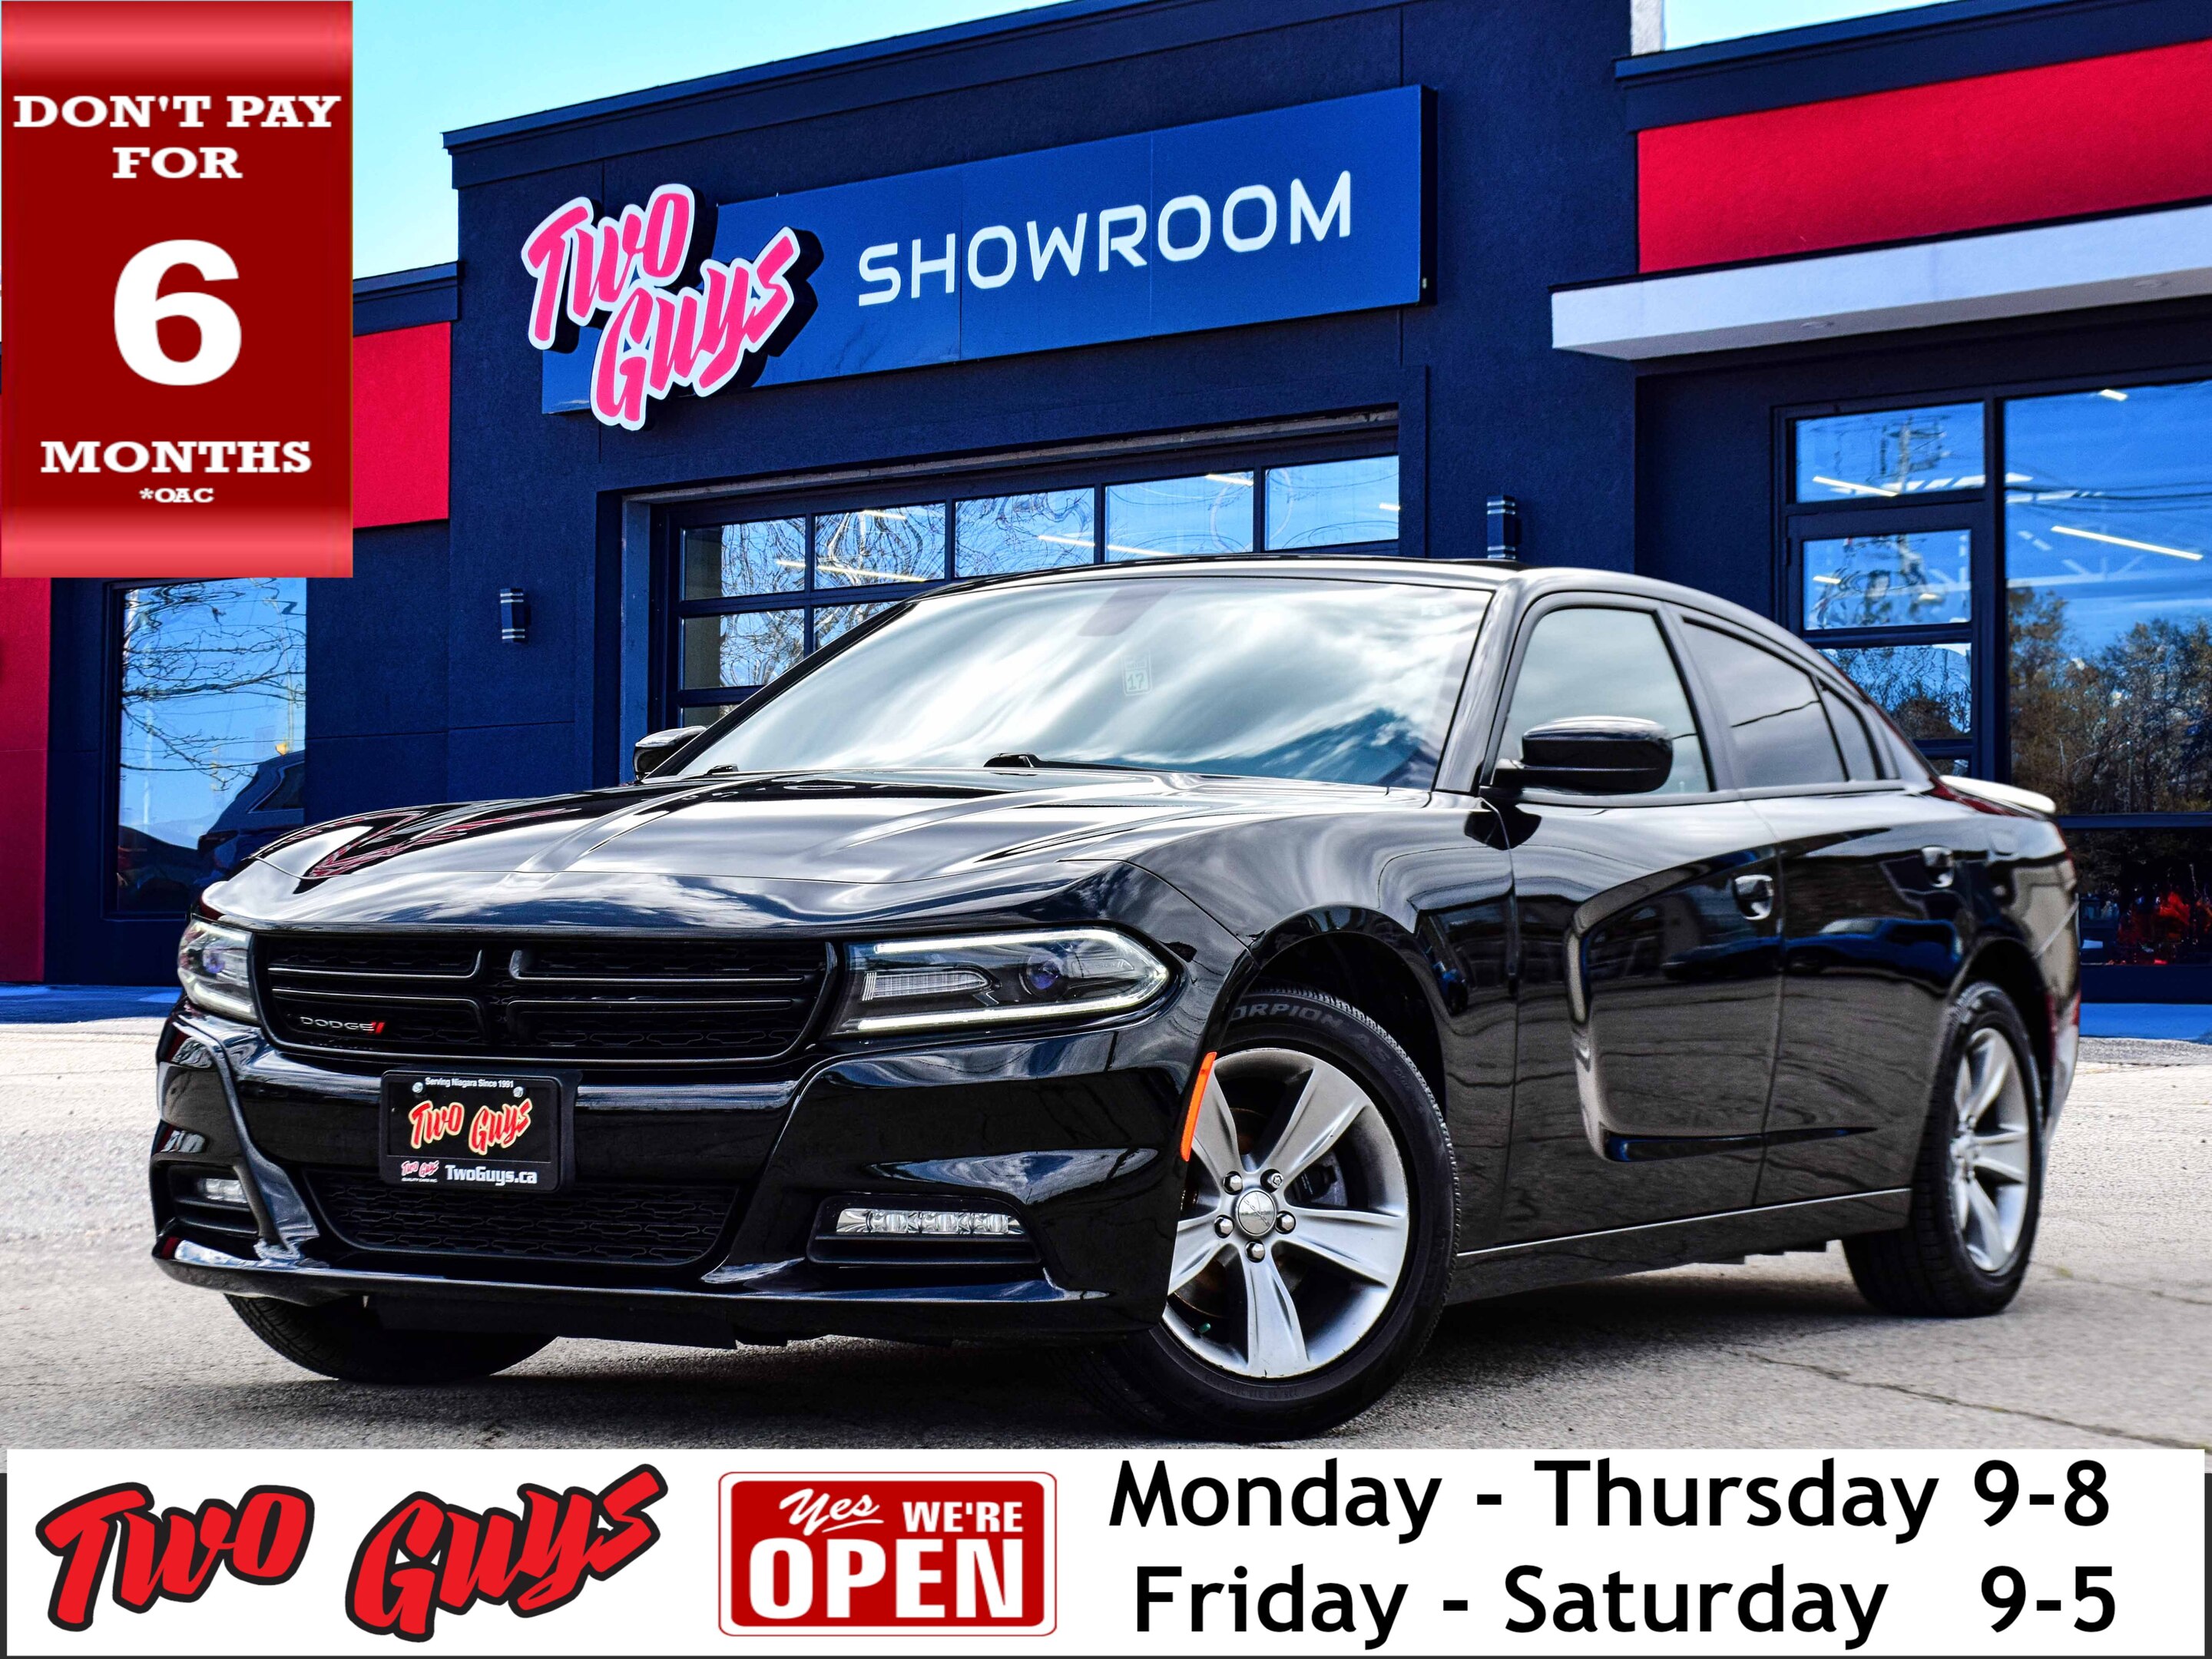 2015 Dodge Charger 4dr Sdn SXT RWD Remote Start Sunroof Nav